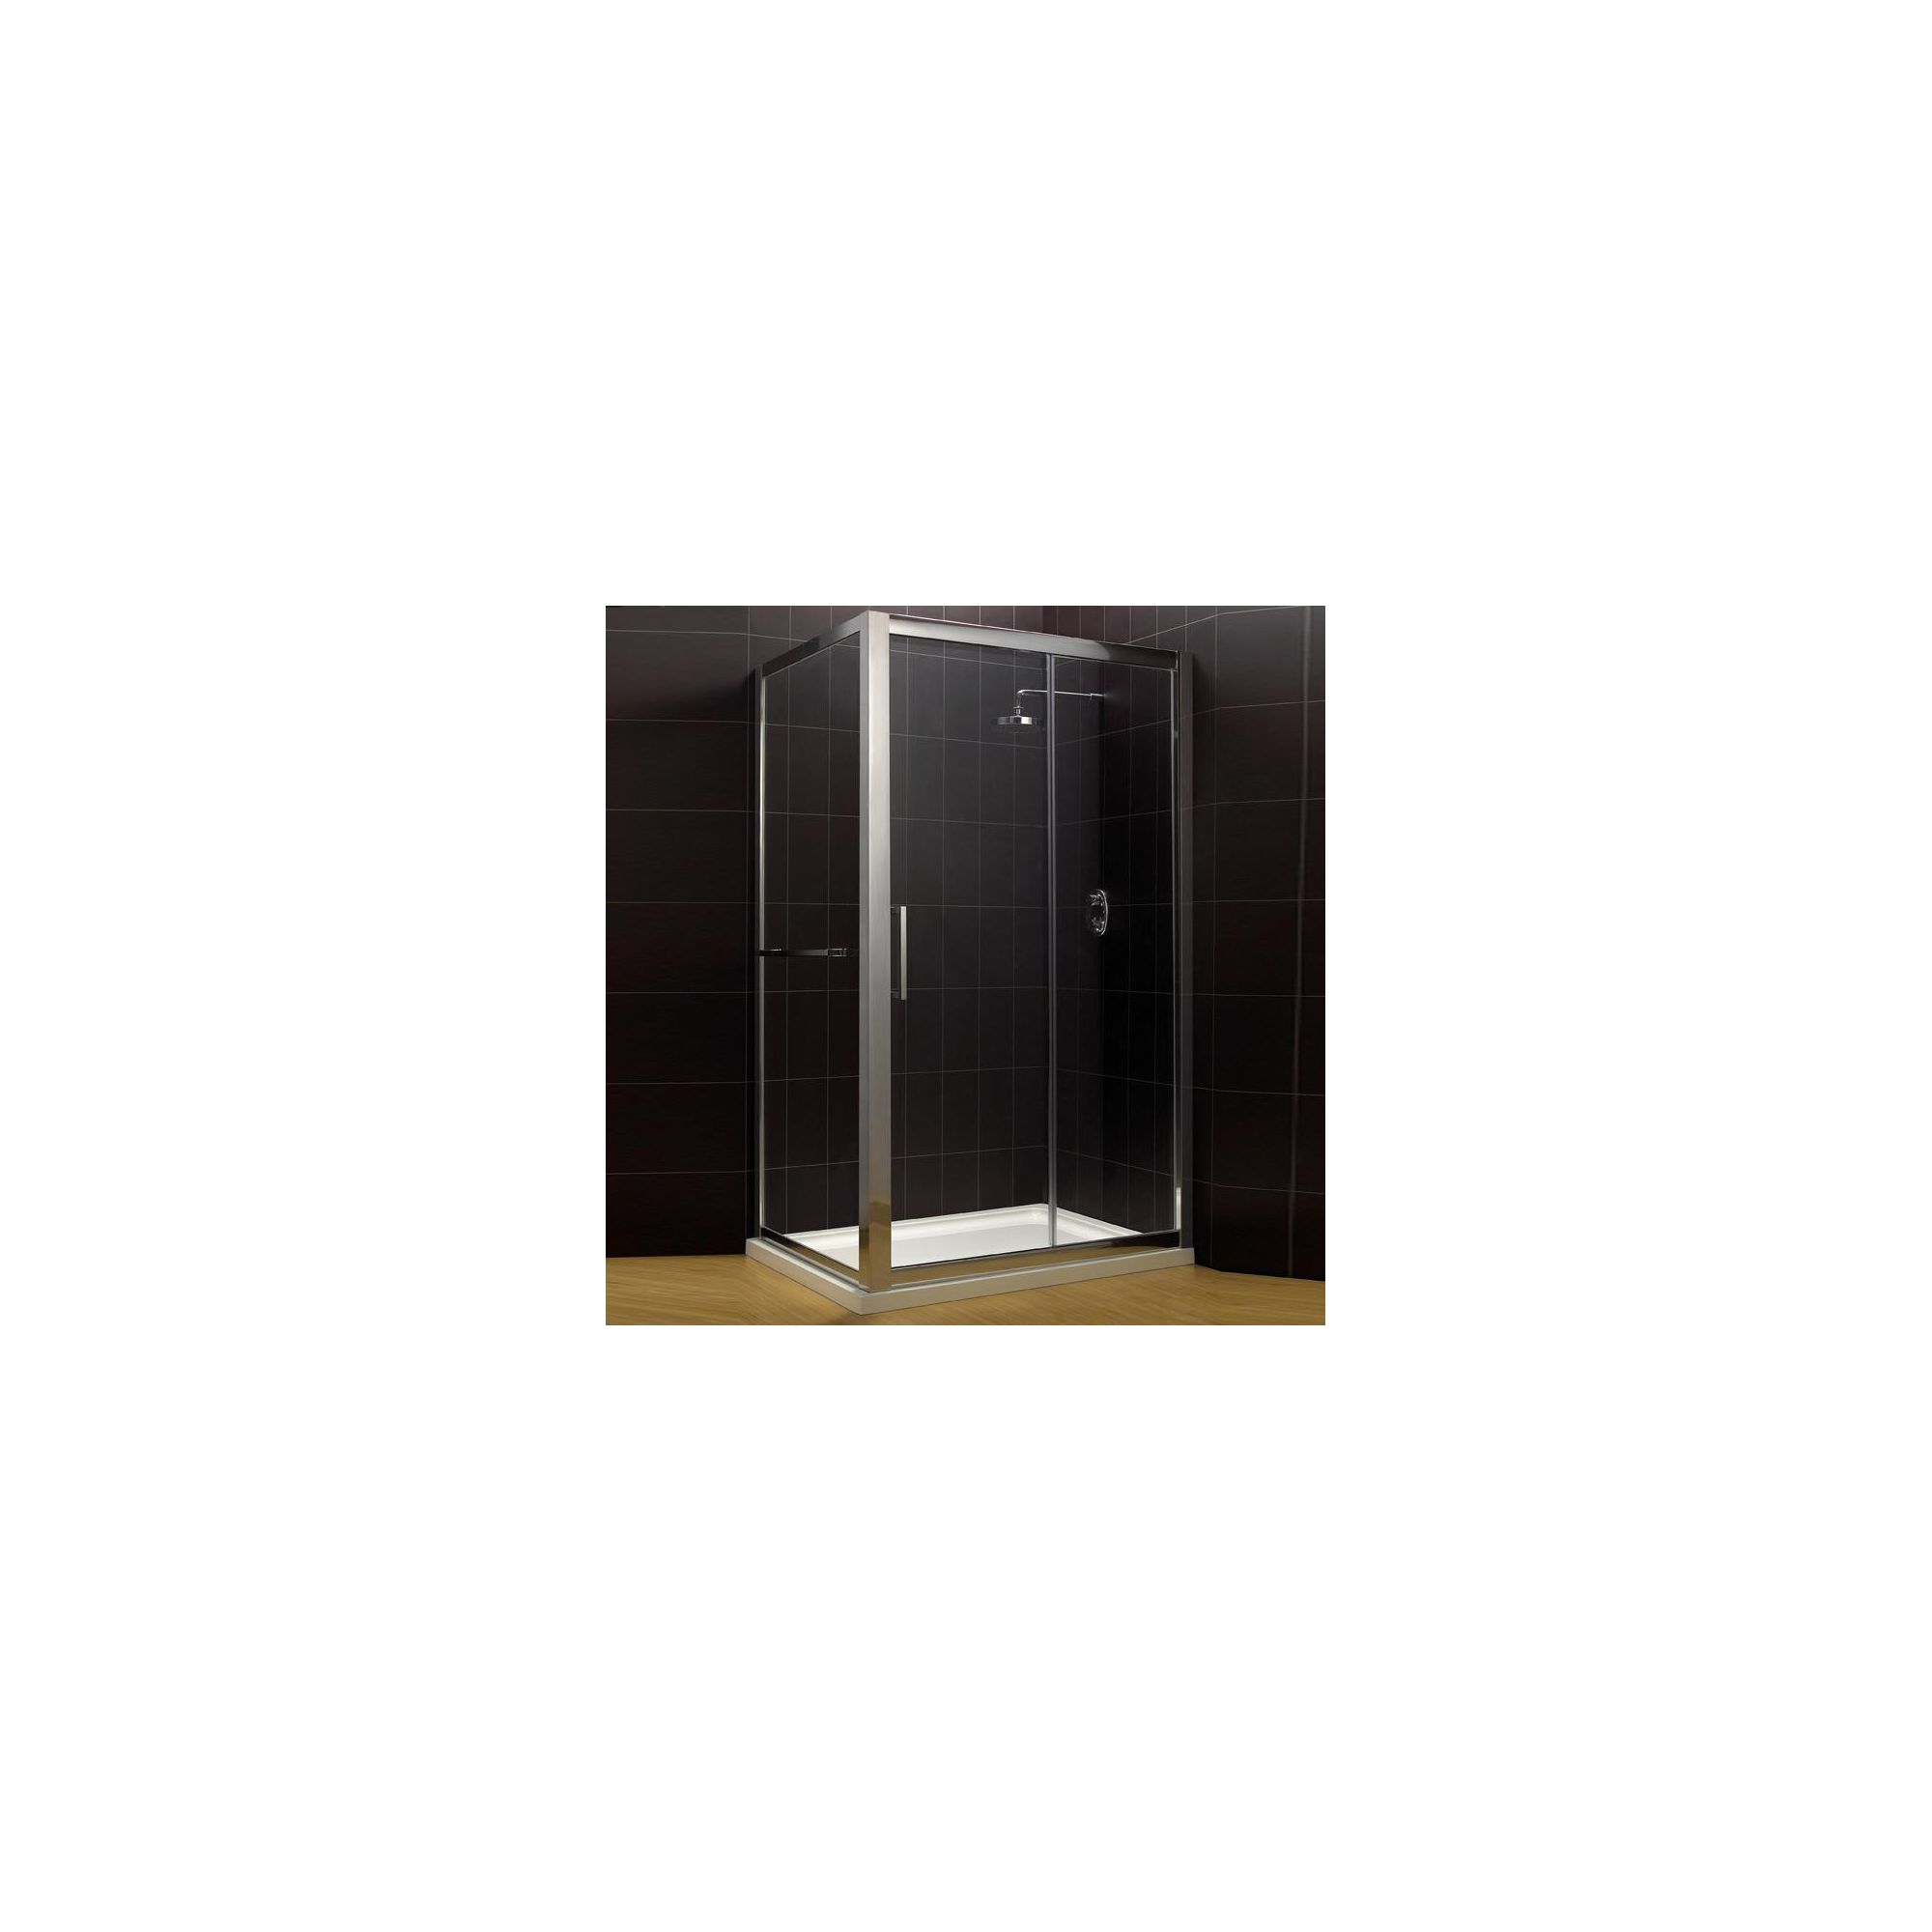 Duchy Supreme Silver Sliding Door Shower Enclosure, 1200mm x 900mm, Standard Tray, 8mm Glass at Tesco Direct